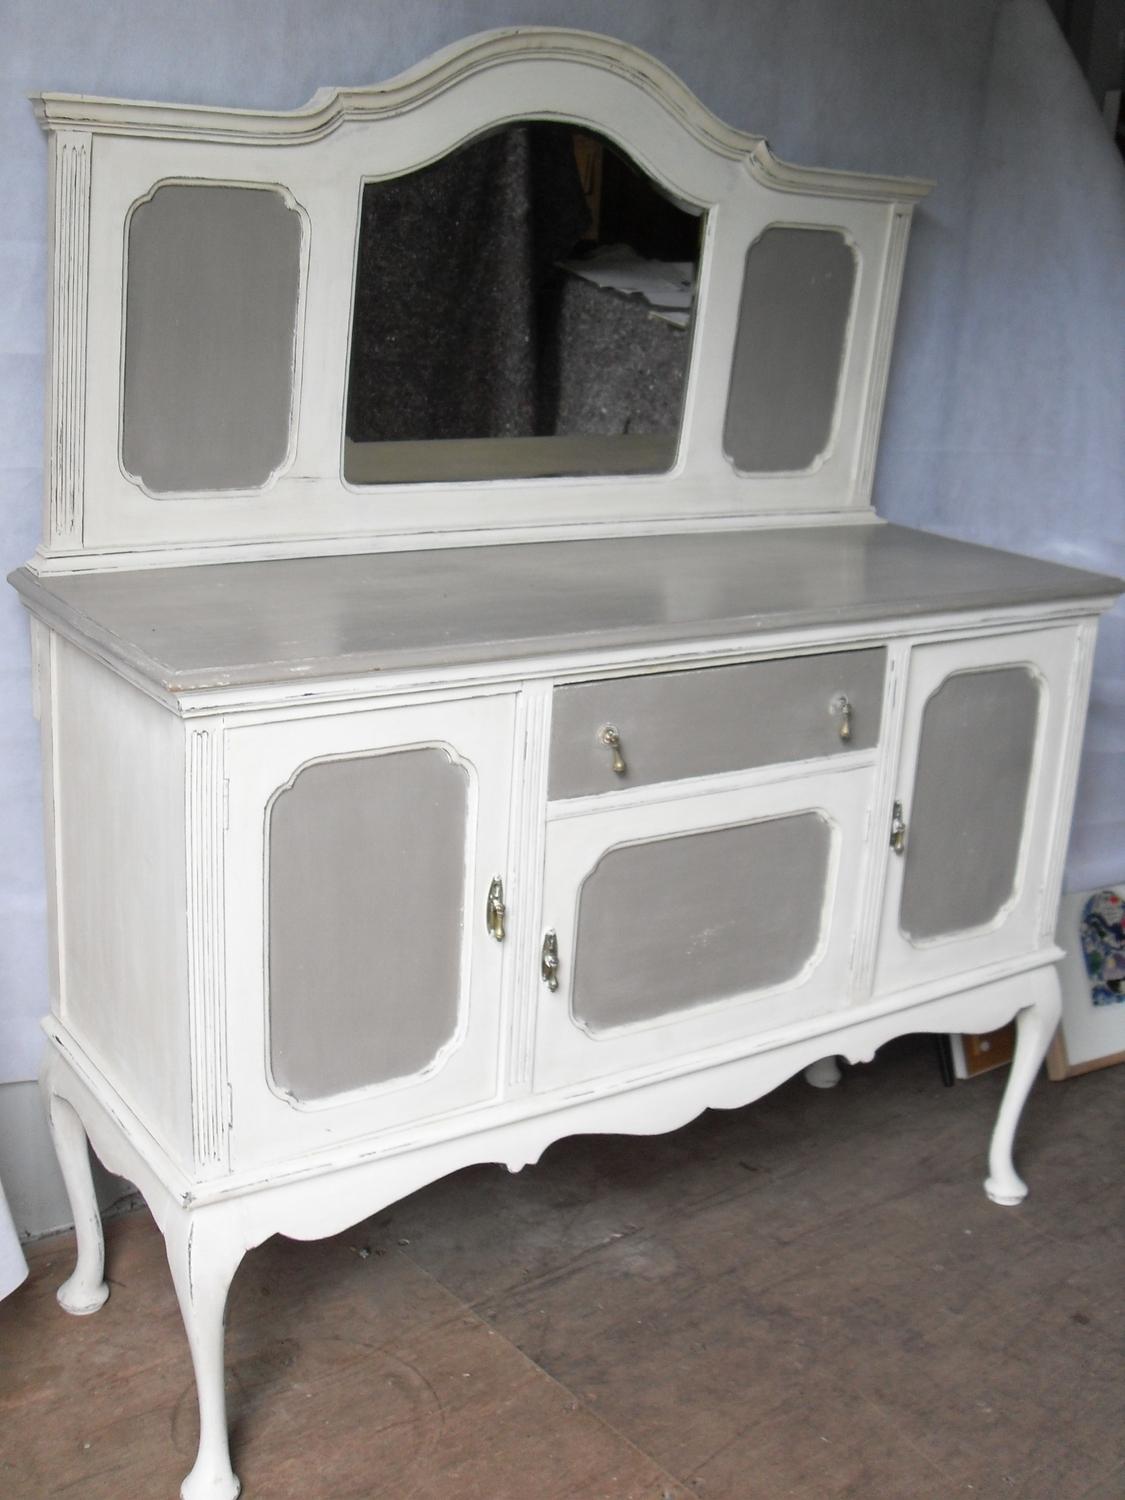 An early 20th century cream-painted sideboard with tray-back domed mirror, central napery drawer and